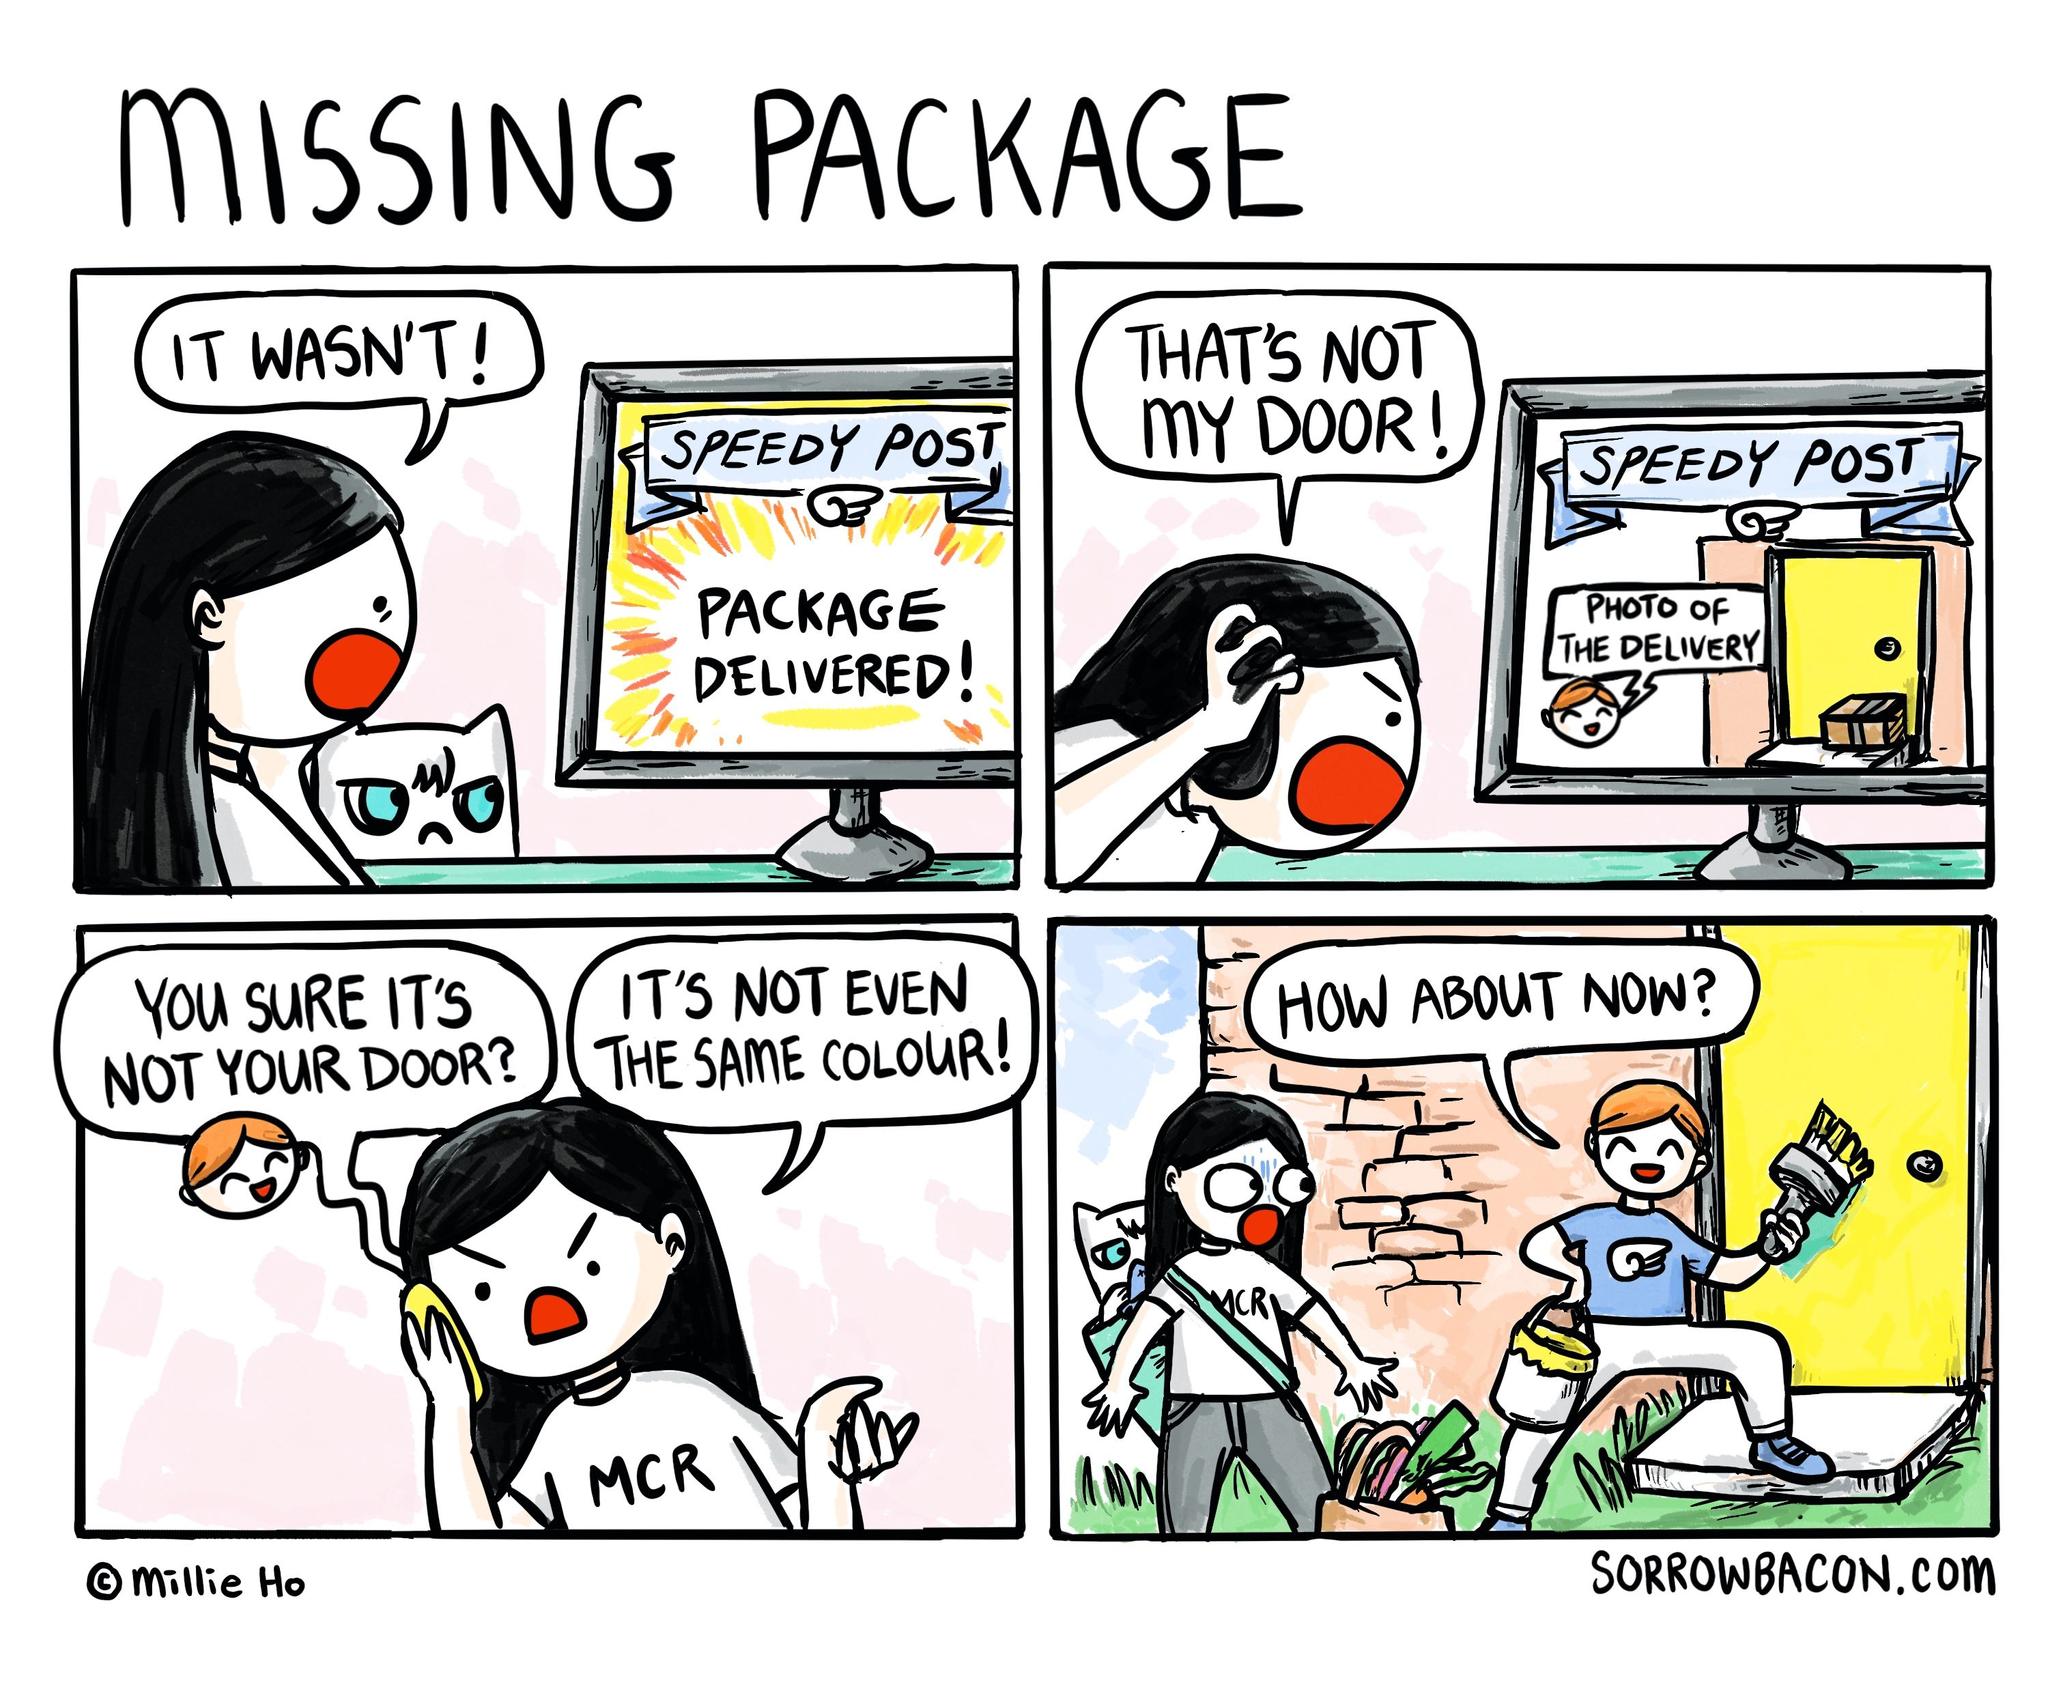 Missing Package sorrowbacon comic